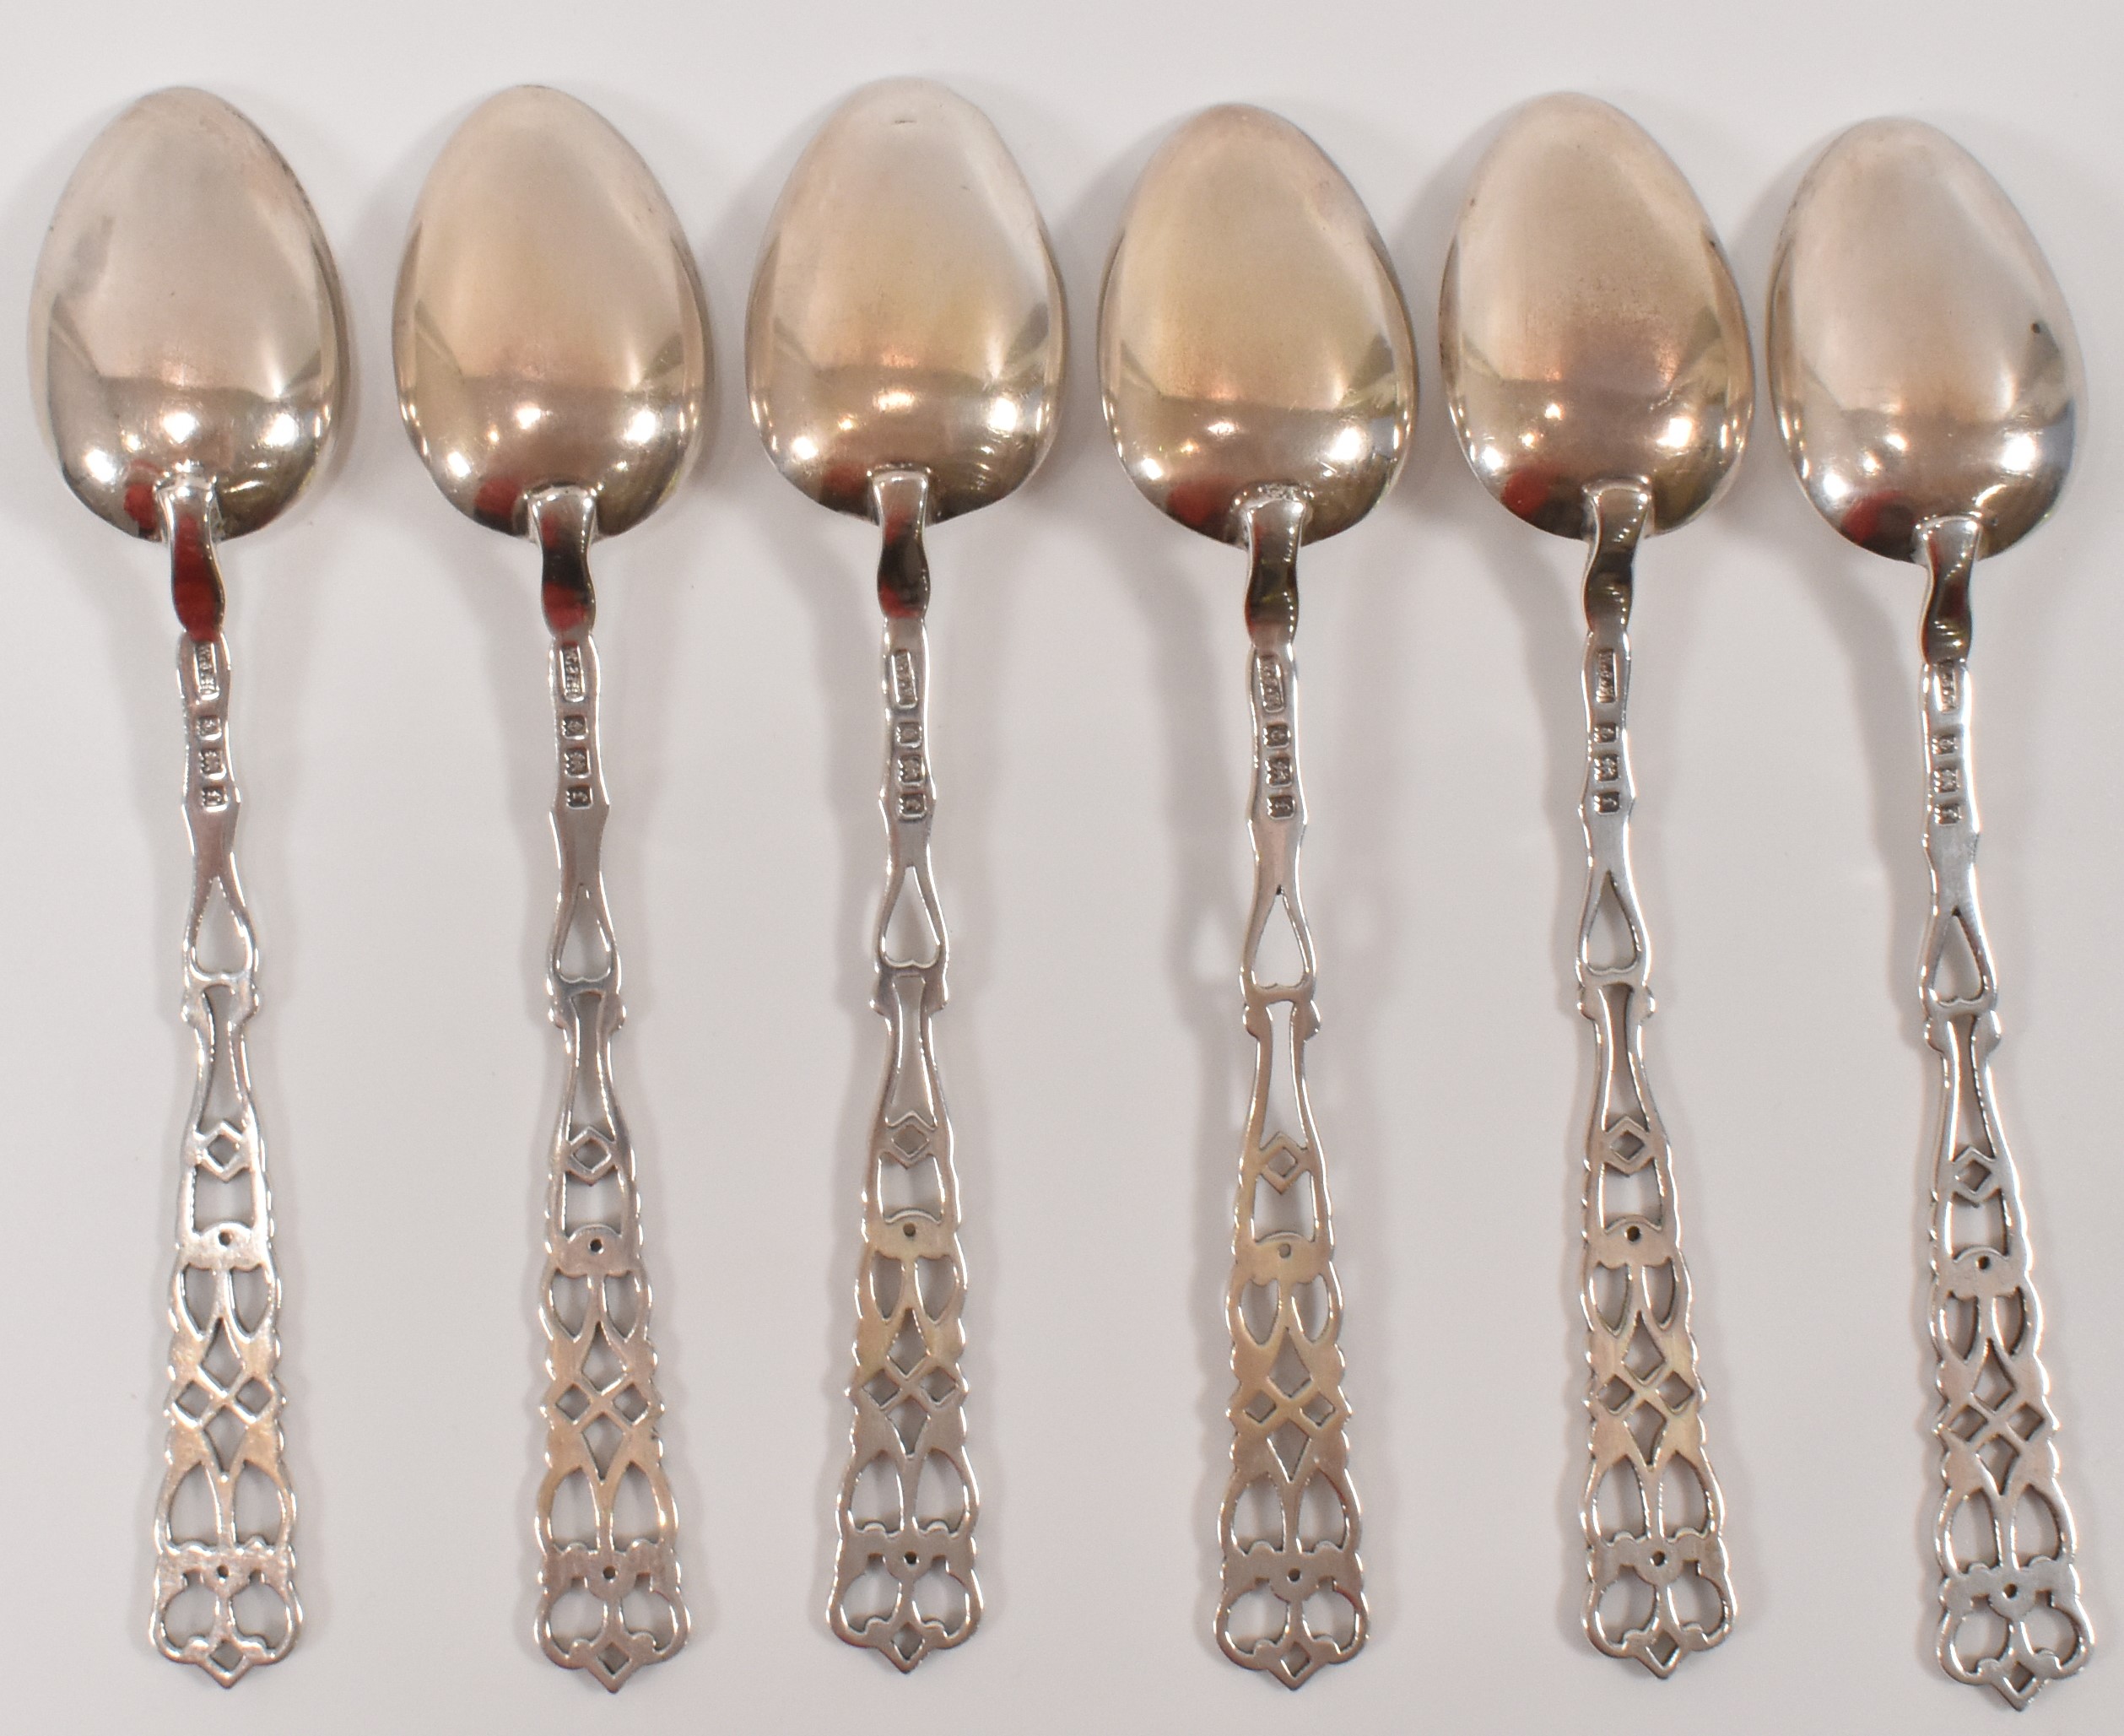 SET OF SIX WILLIAM J HOLMES SILVER SPOONS - Image 4 of 4